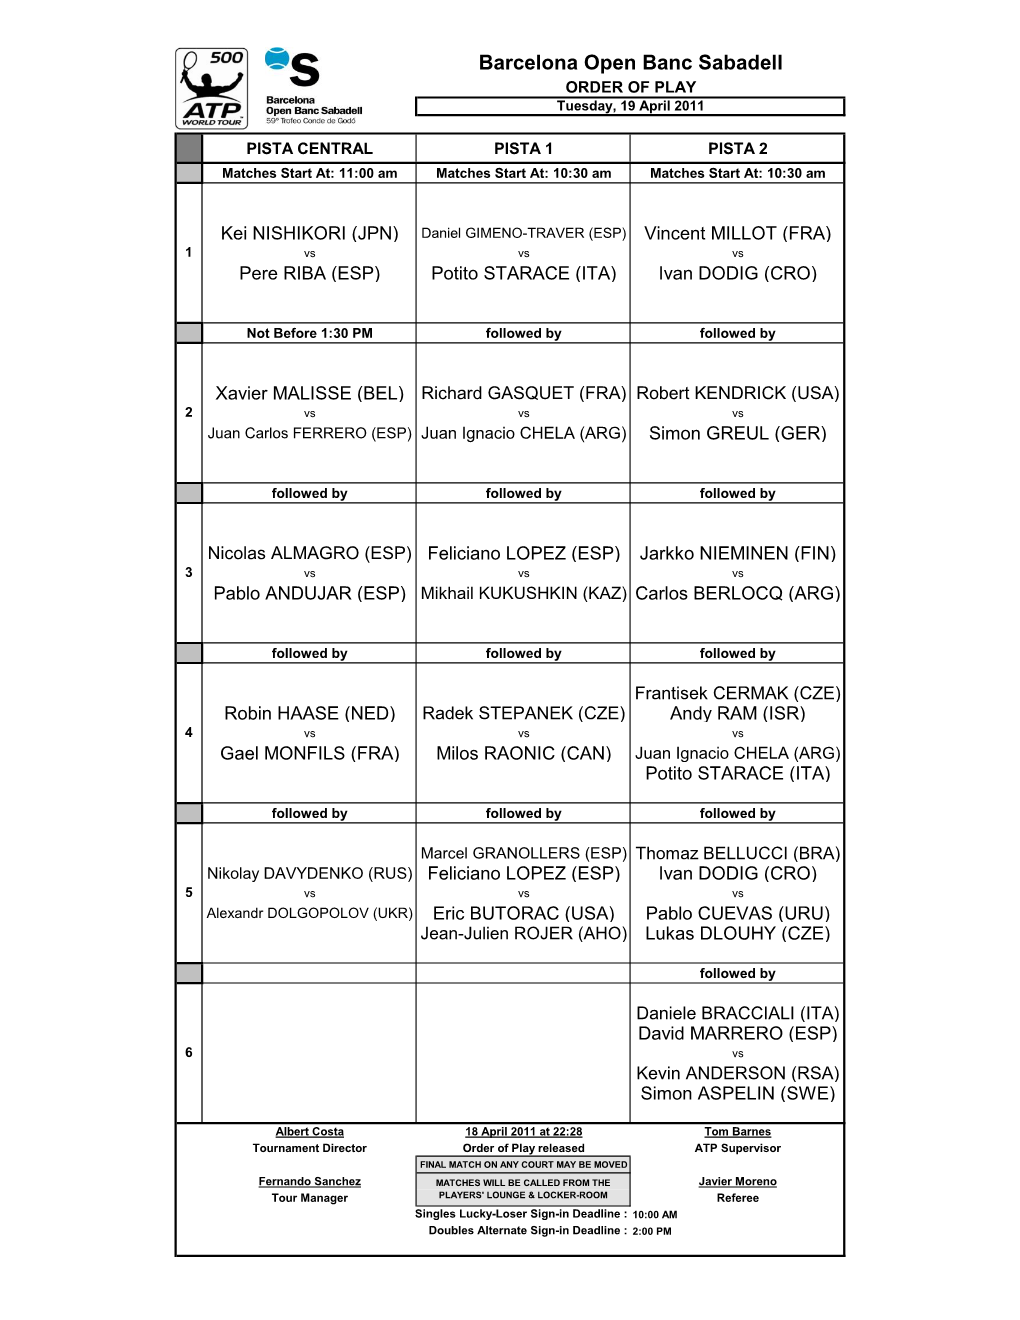 Barcelona Open Banc Sabadell ORDER of PLAY Tuesday, 19 April 2011